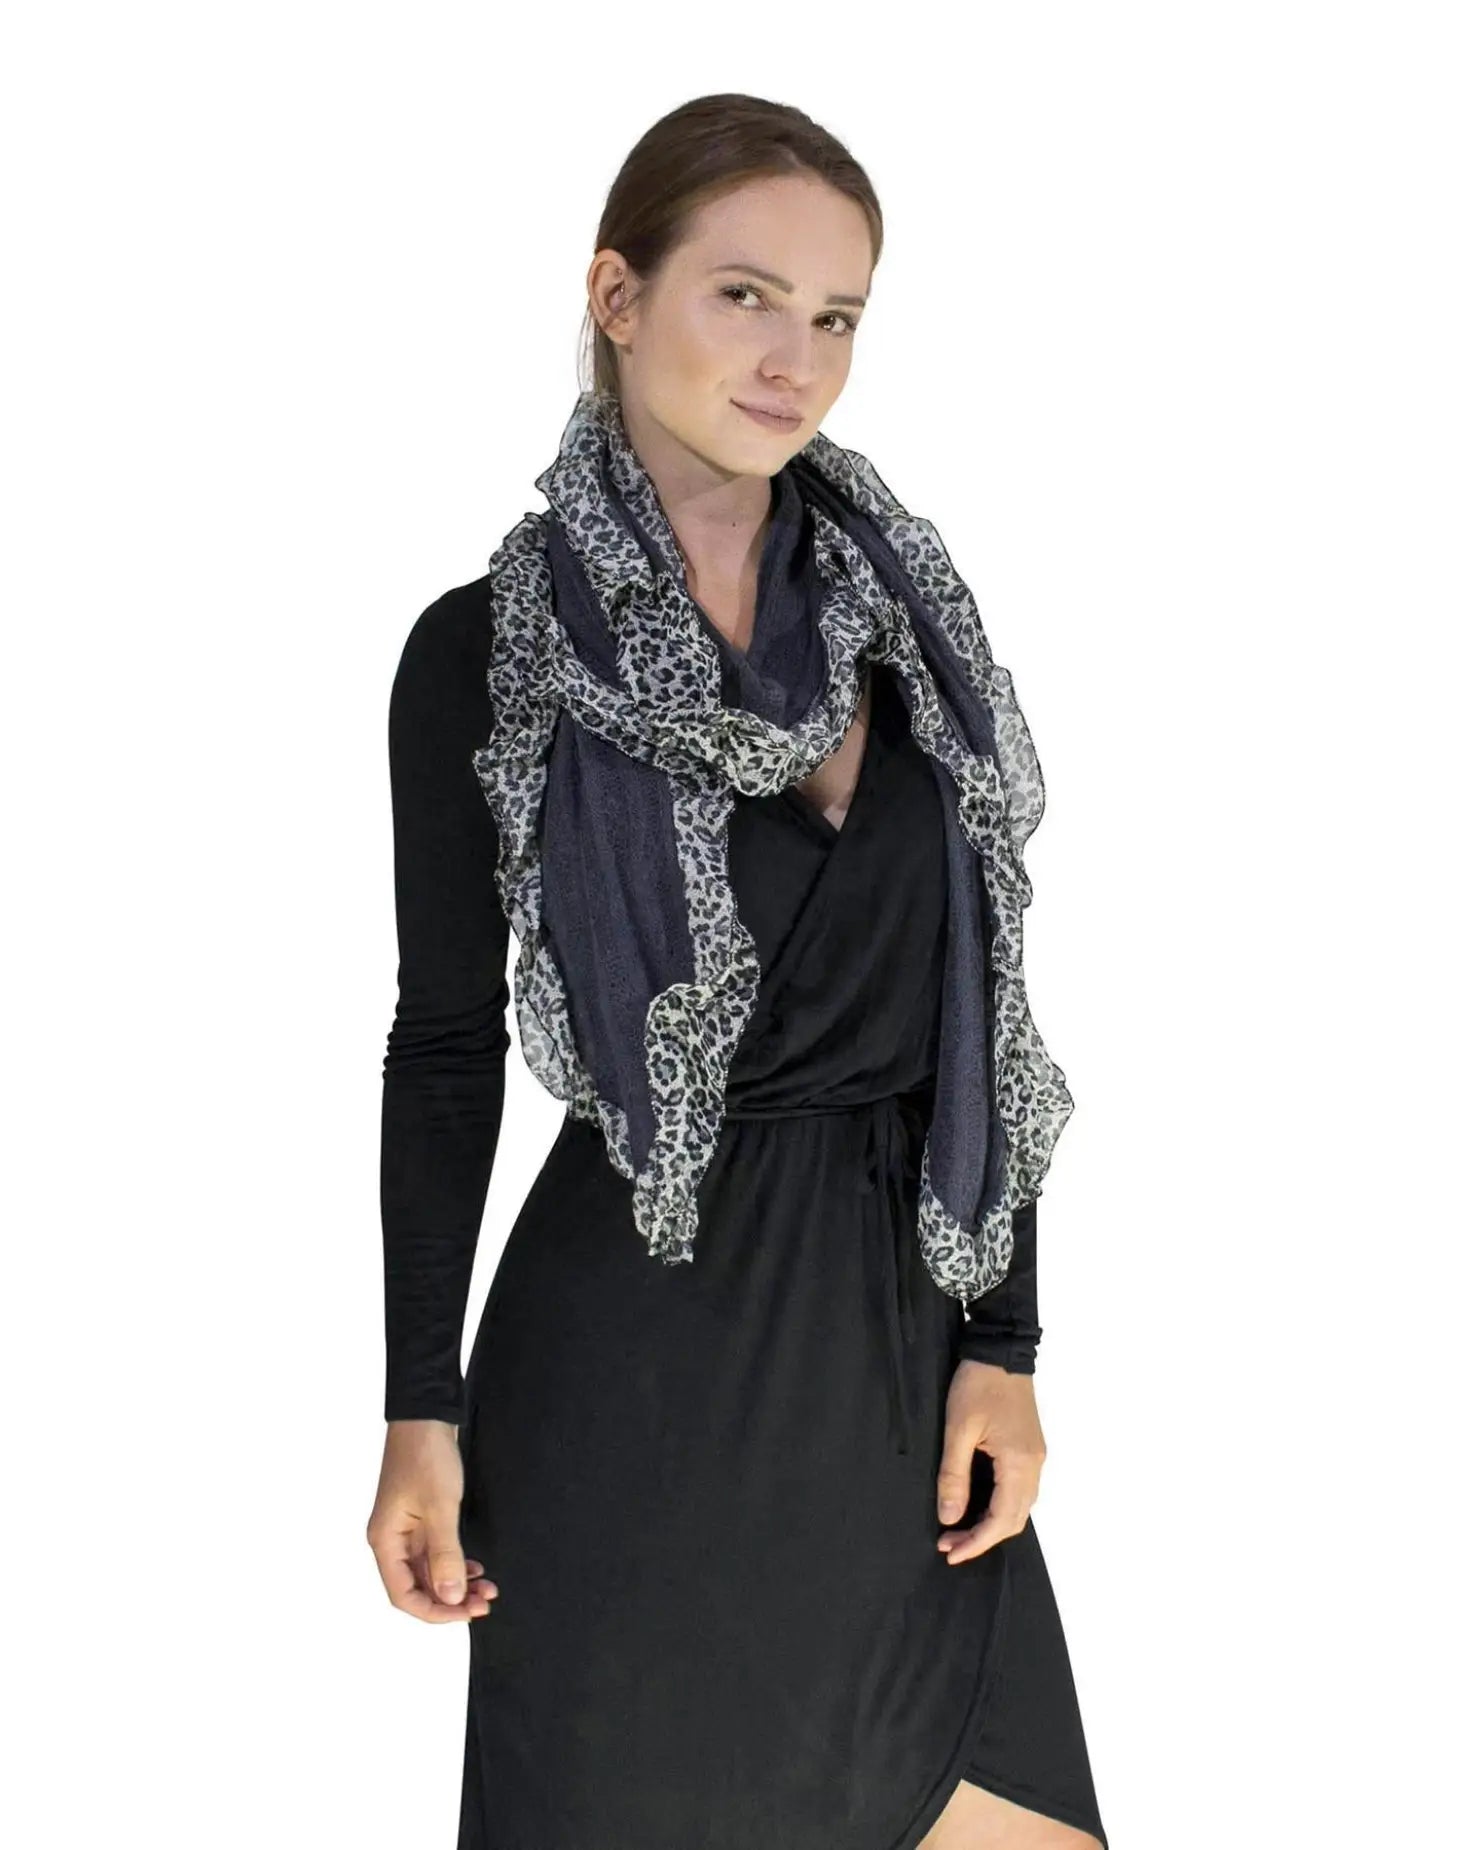 Woman wearing black dress and scarf, featuring Ruffle Leopard Print Knitted Scarf